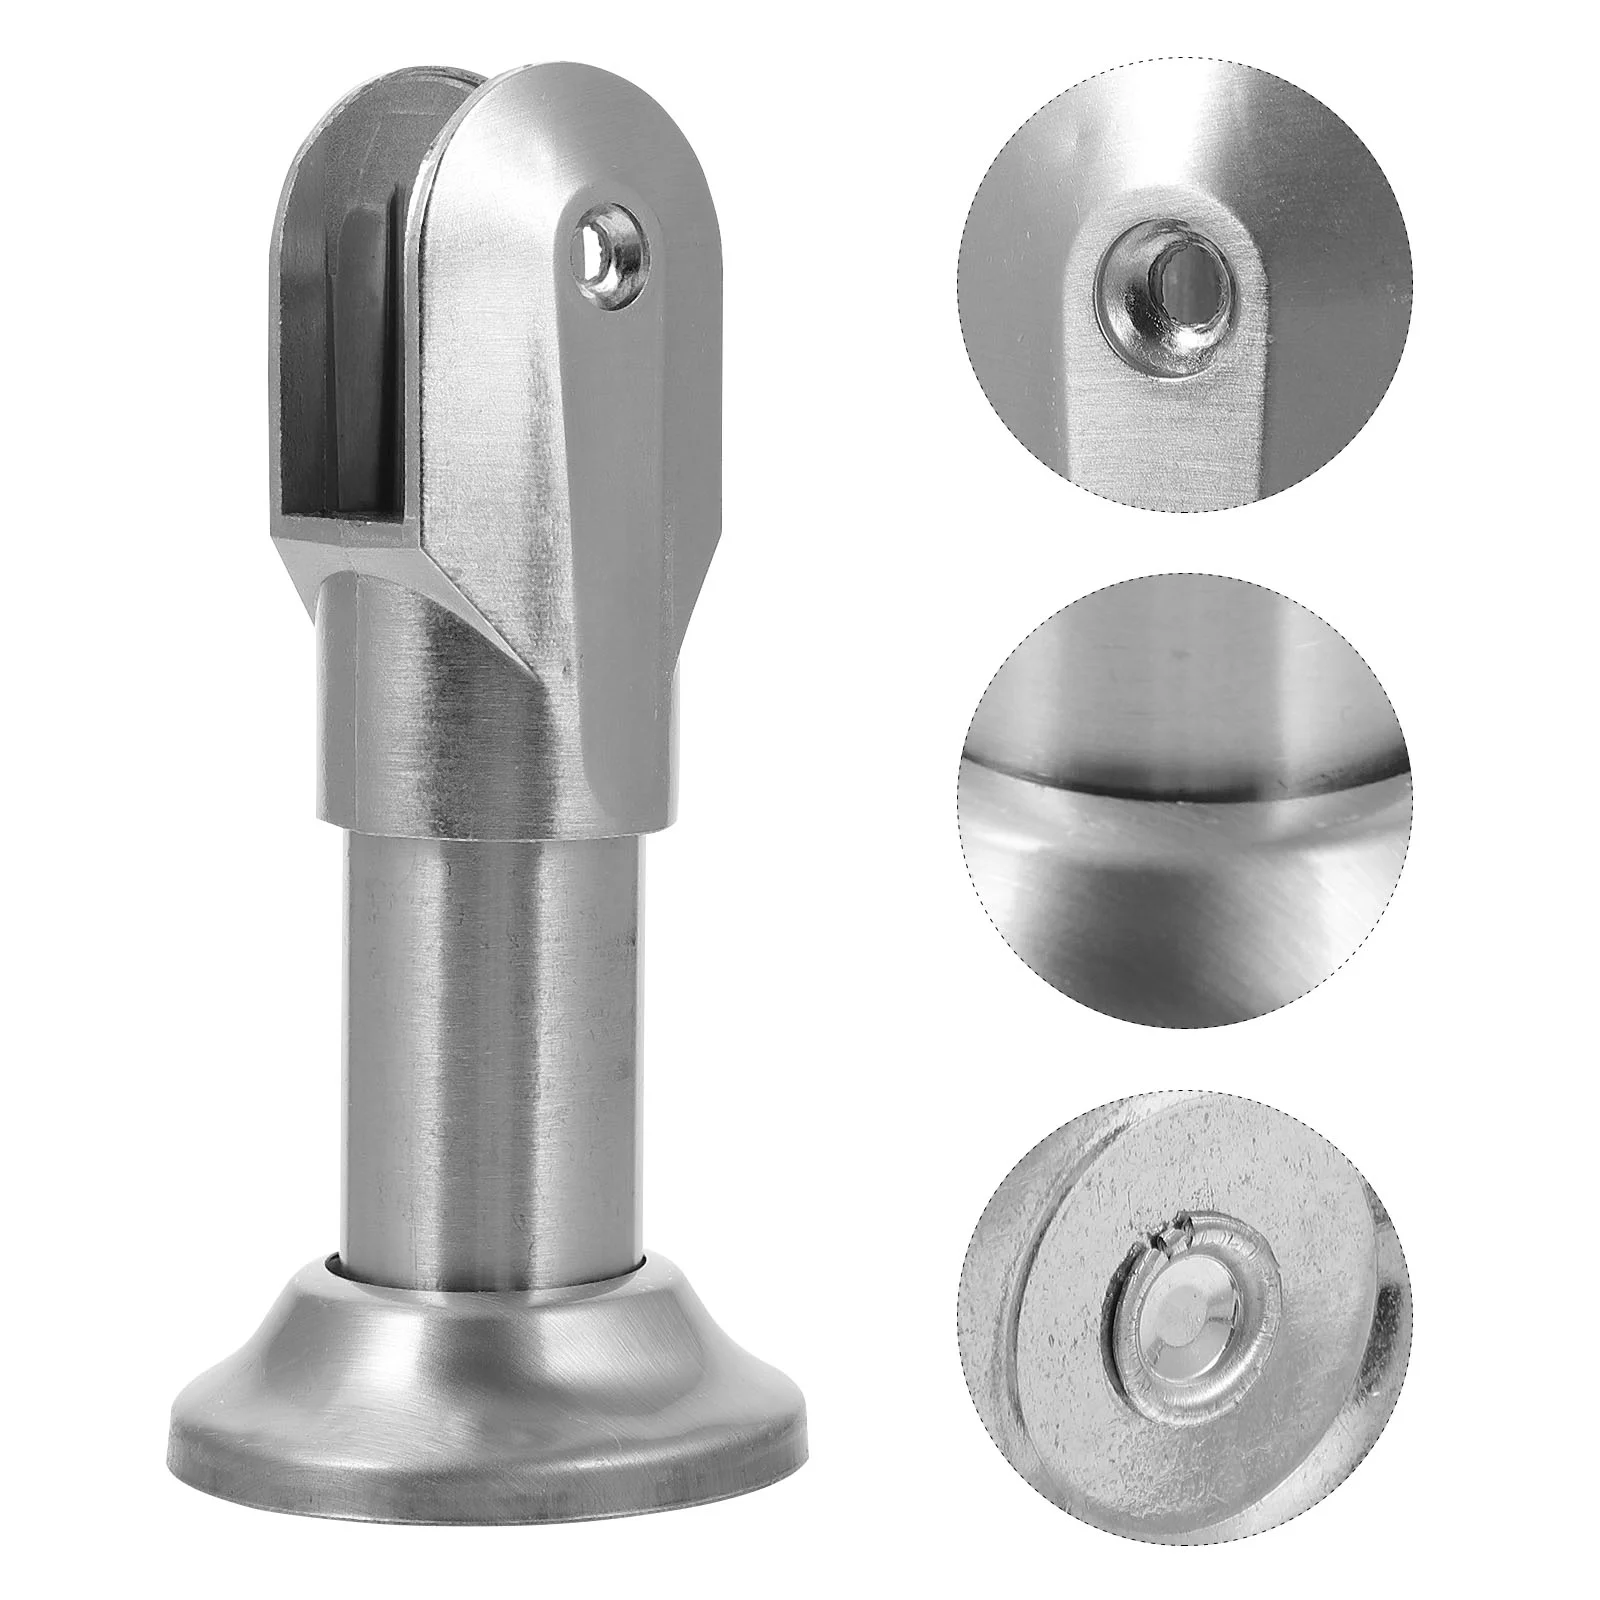 

2 Pcs Partition Bracket Feet Wall Mounts Restroom Stainless Support Supply Alloy Toilet Fittings Parts